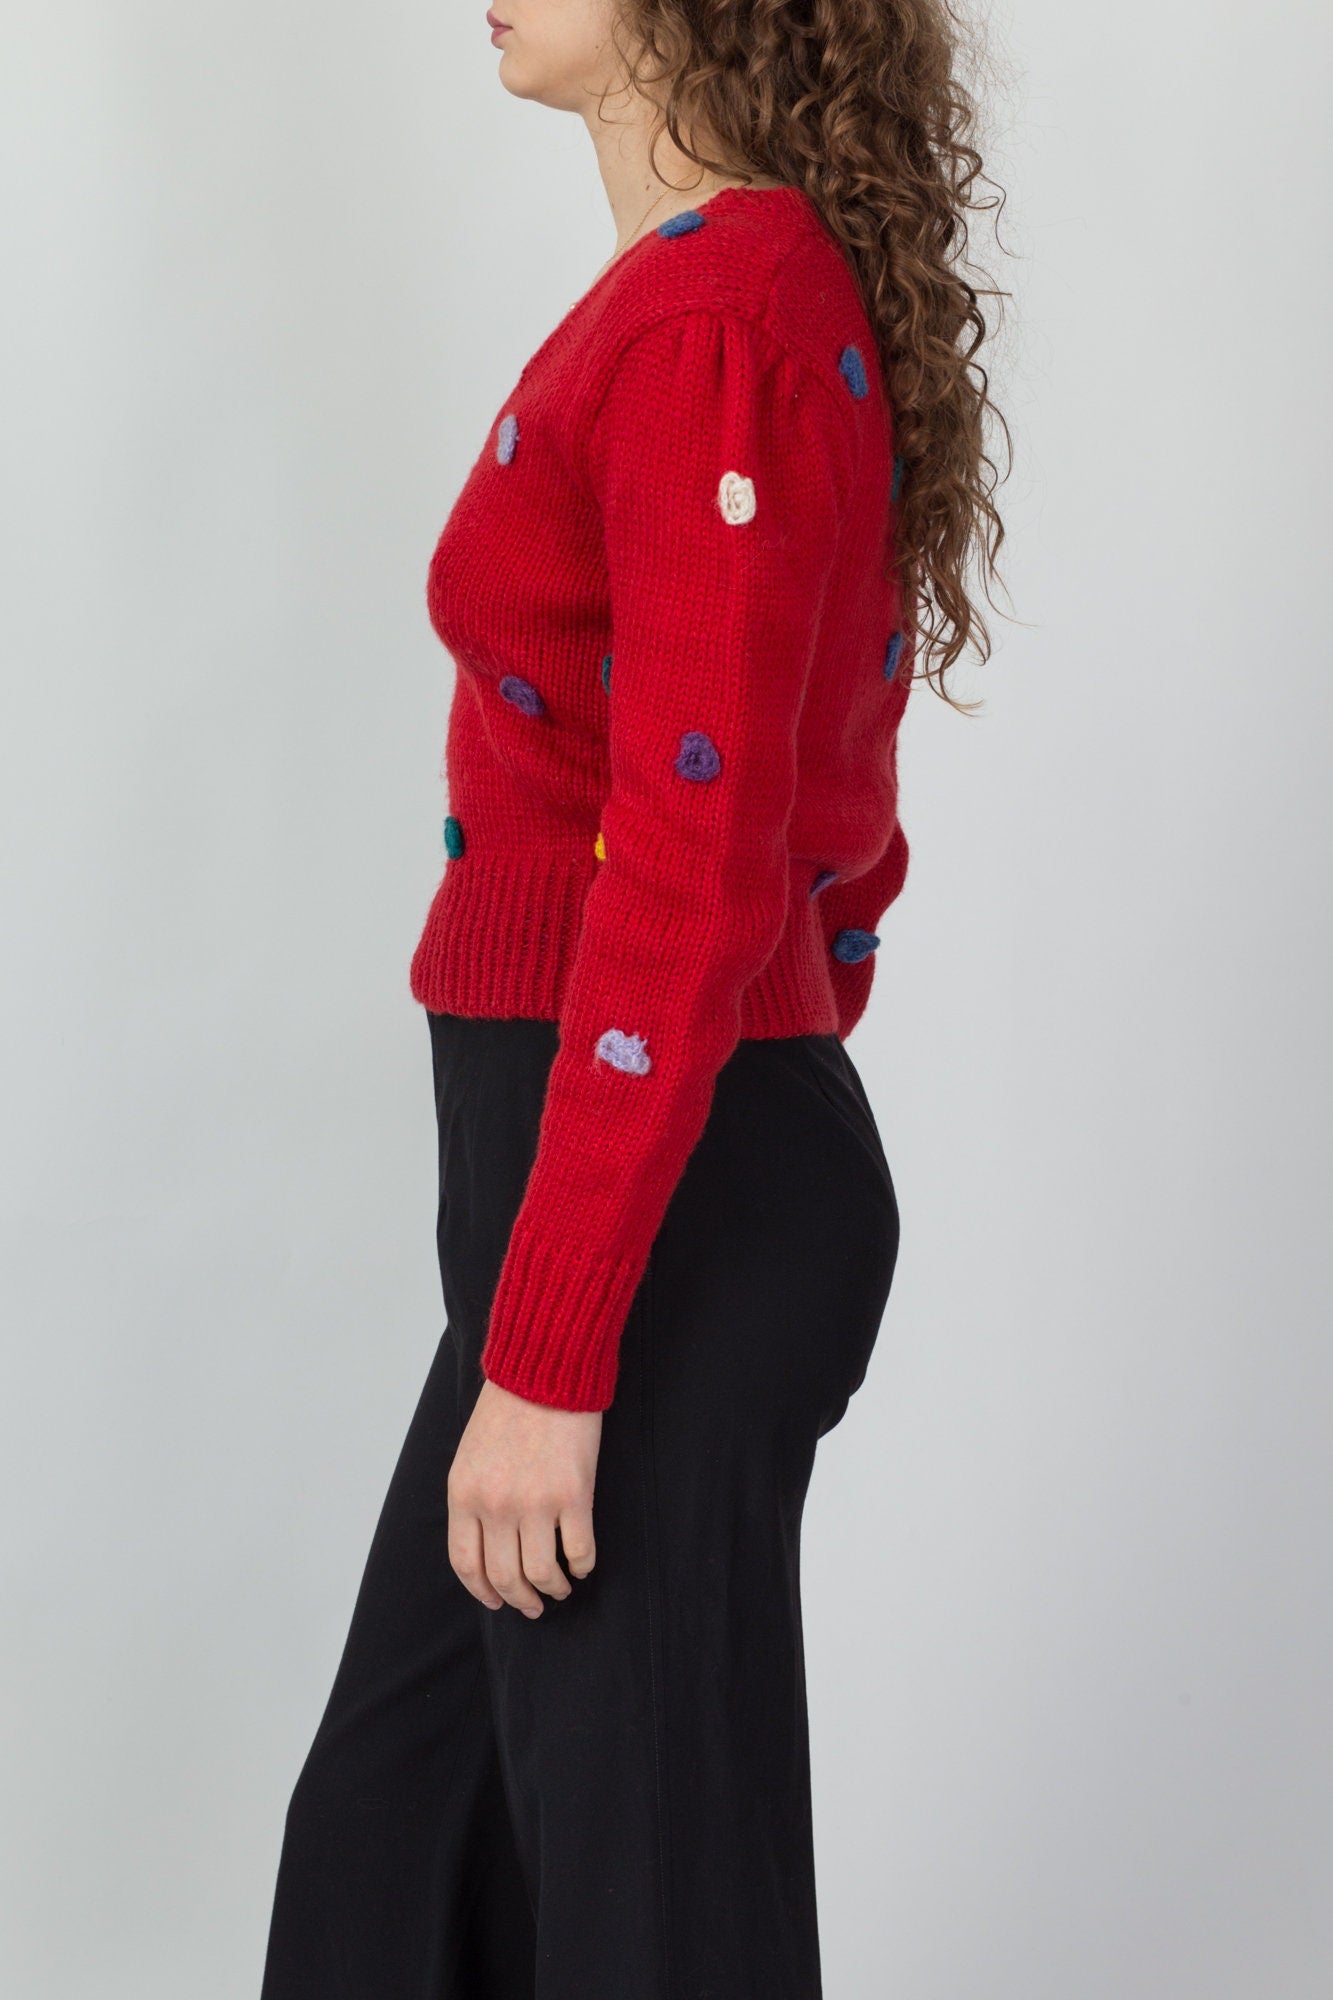 80s Red Rainbow Bauble Cropped Knit Sweater - Medium 